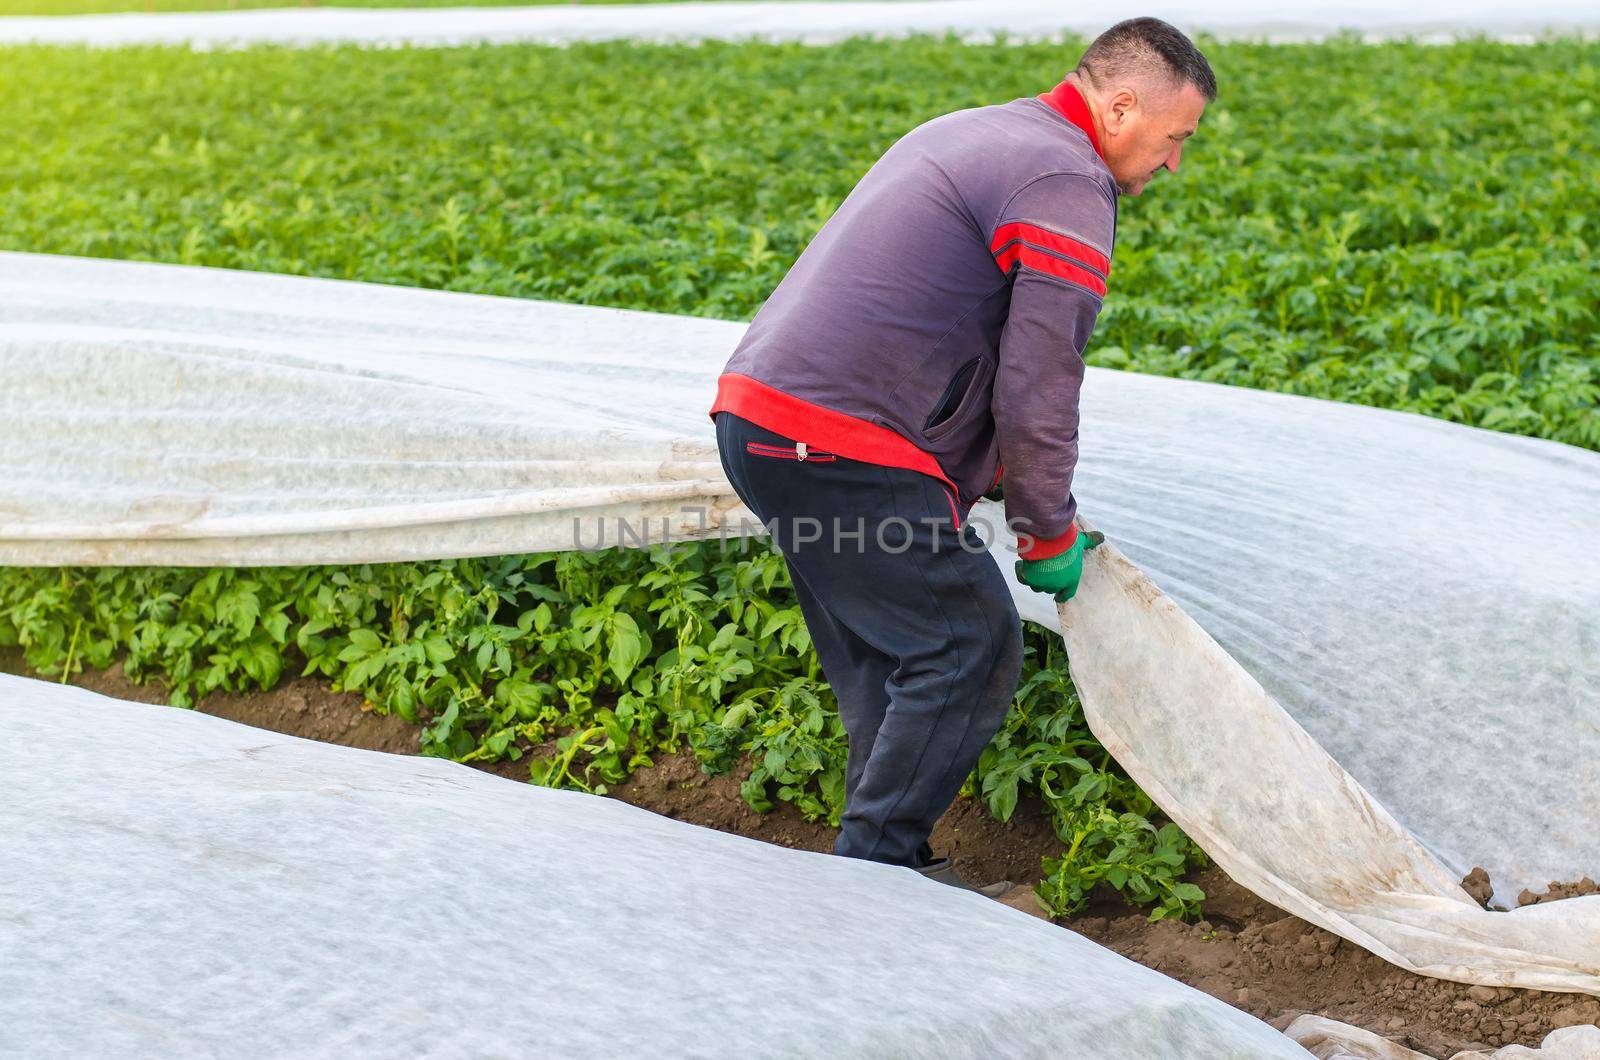 A man removes agrofibre from potato plants. Greenhouse effect for protection. Agroindustry, farming. Growing crops in a colder early season. Crop protection from low temperatures and wind.